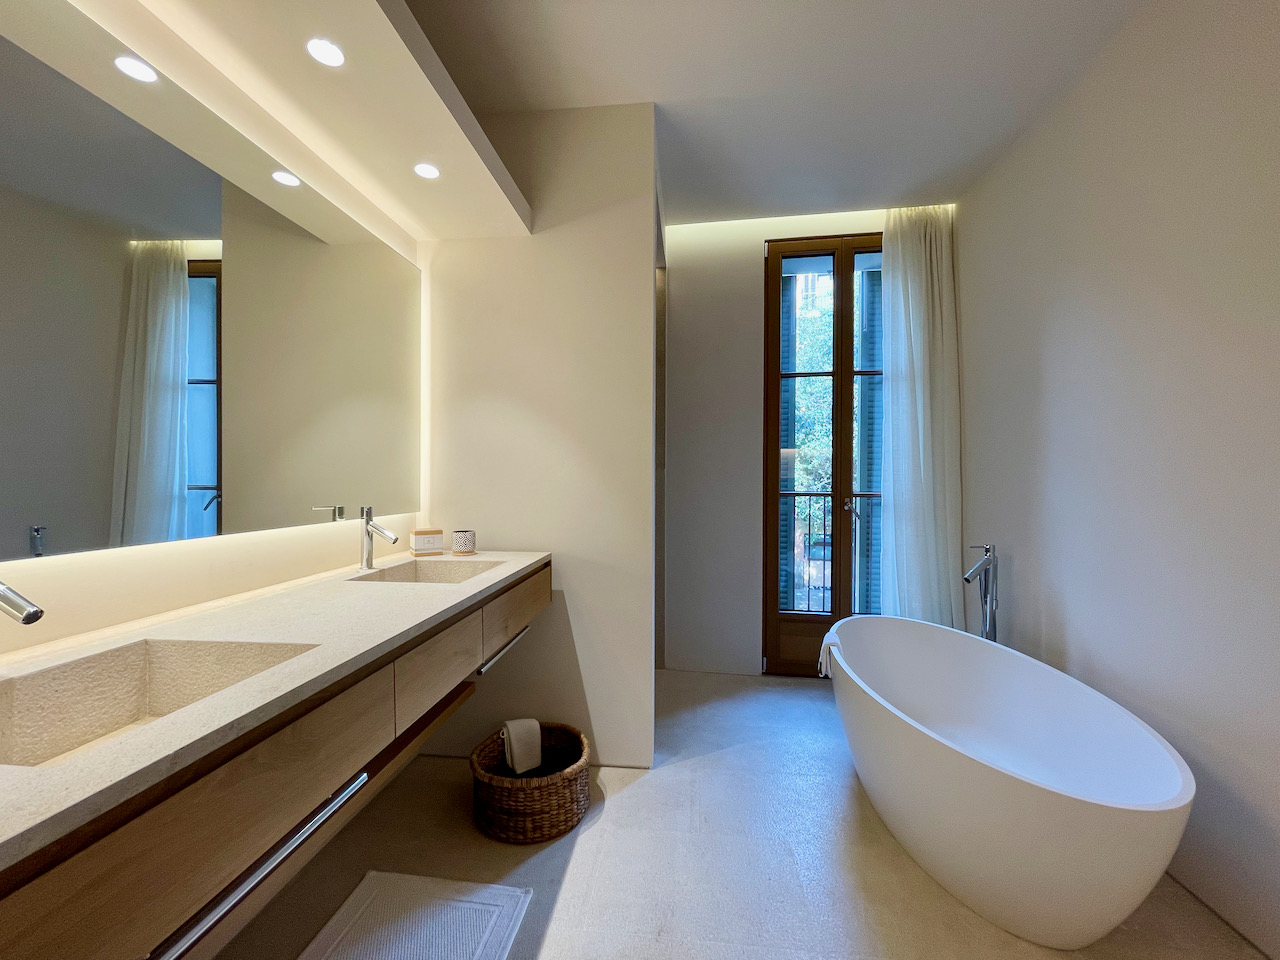 Elegant luxury apartment in a Malloquin style building in the Old Town of Palma